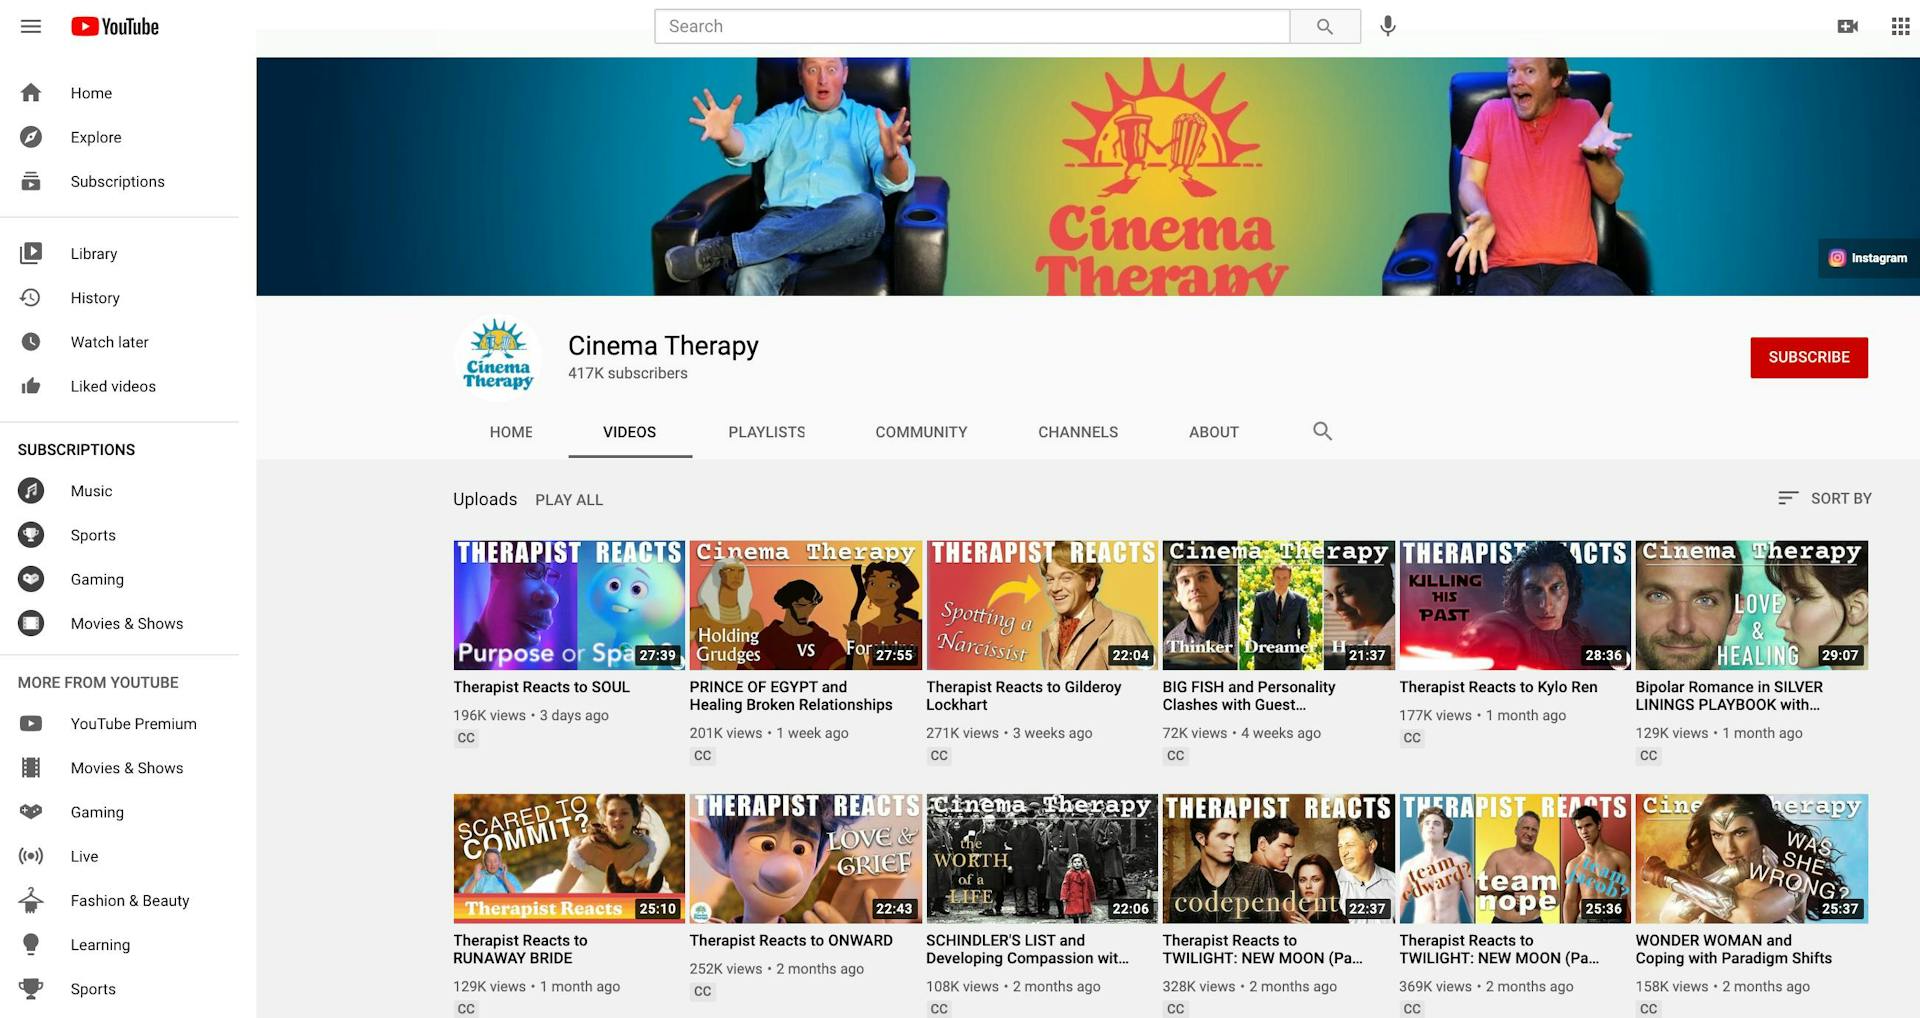 Full list of videos on Cinema Therapy YouTube channel showcasing different styles of thumbnails